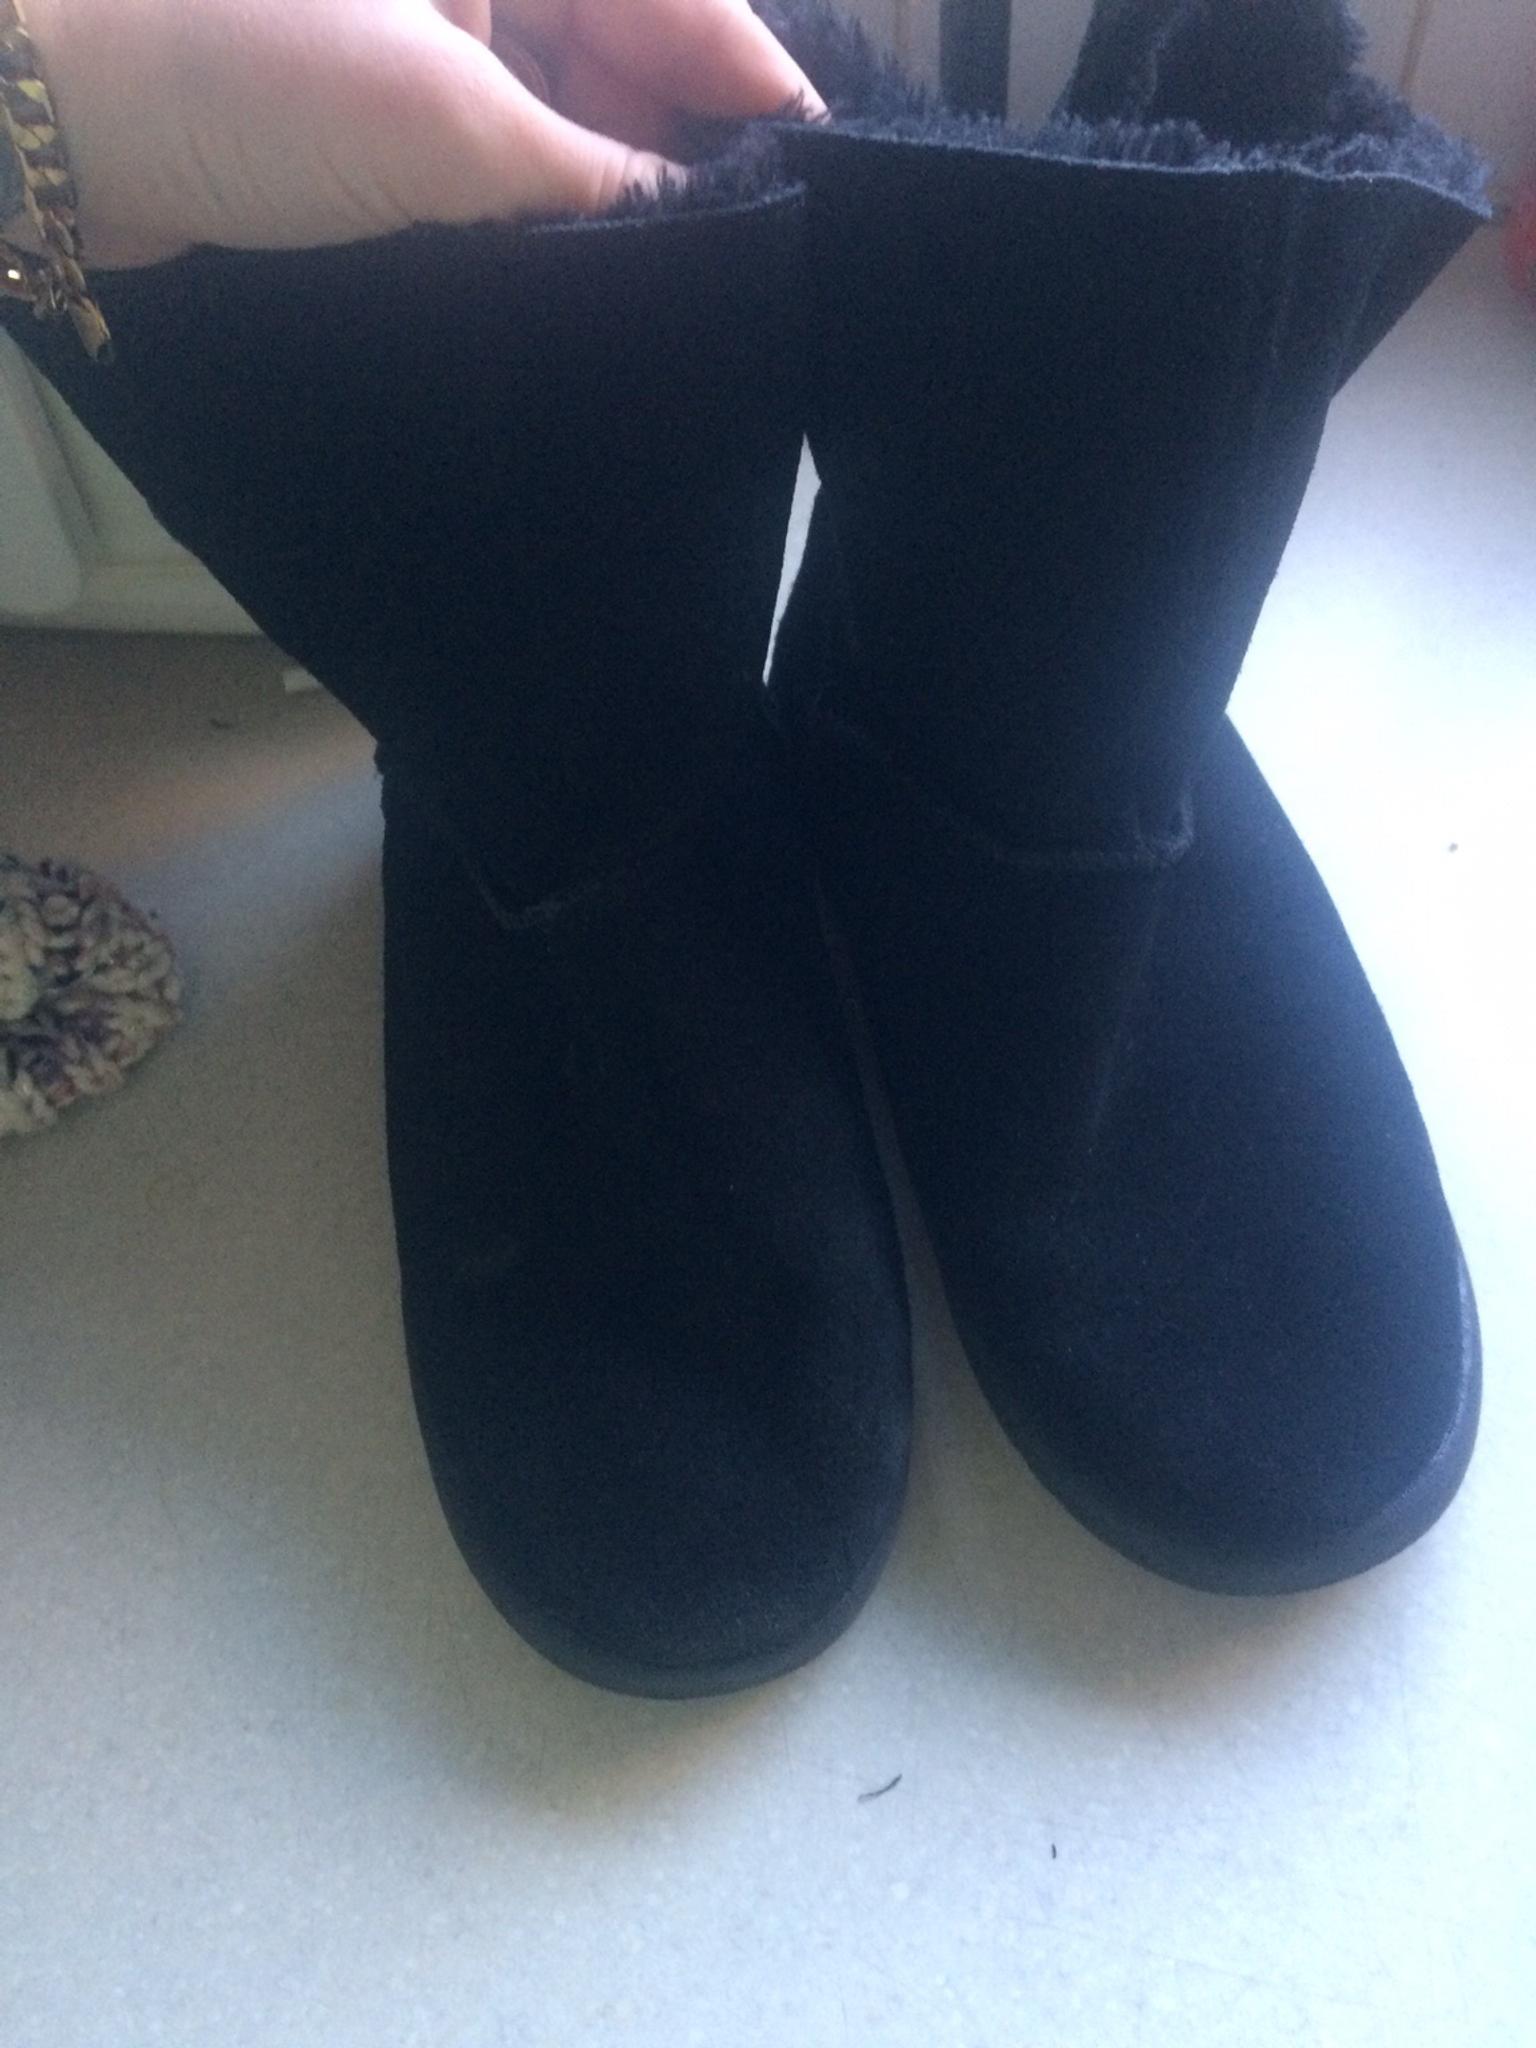 river island ugg type boots